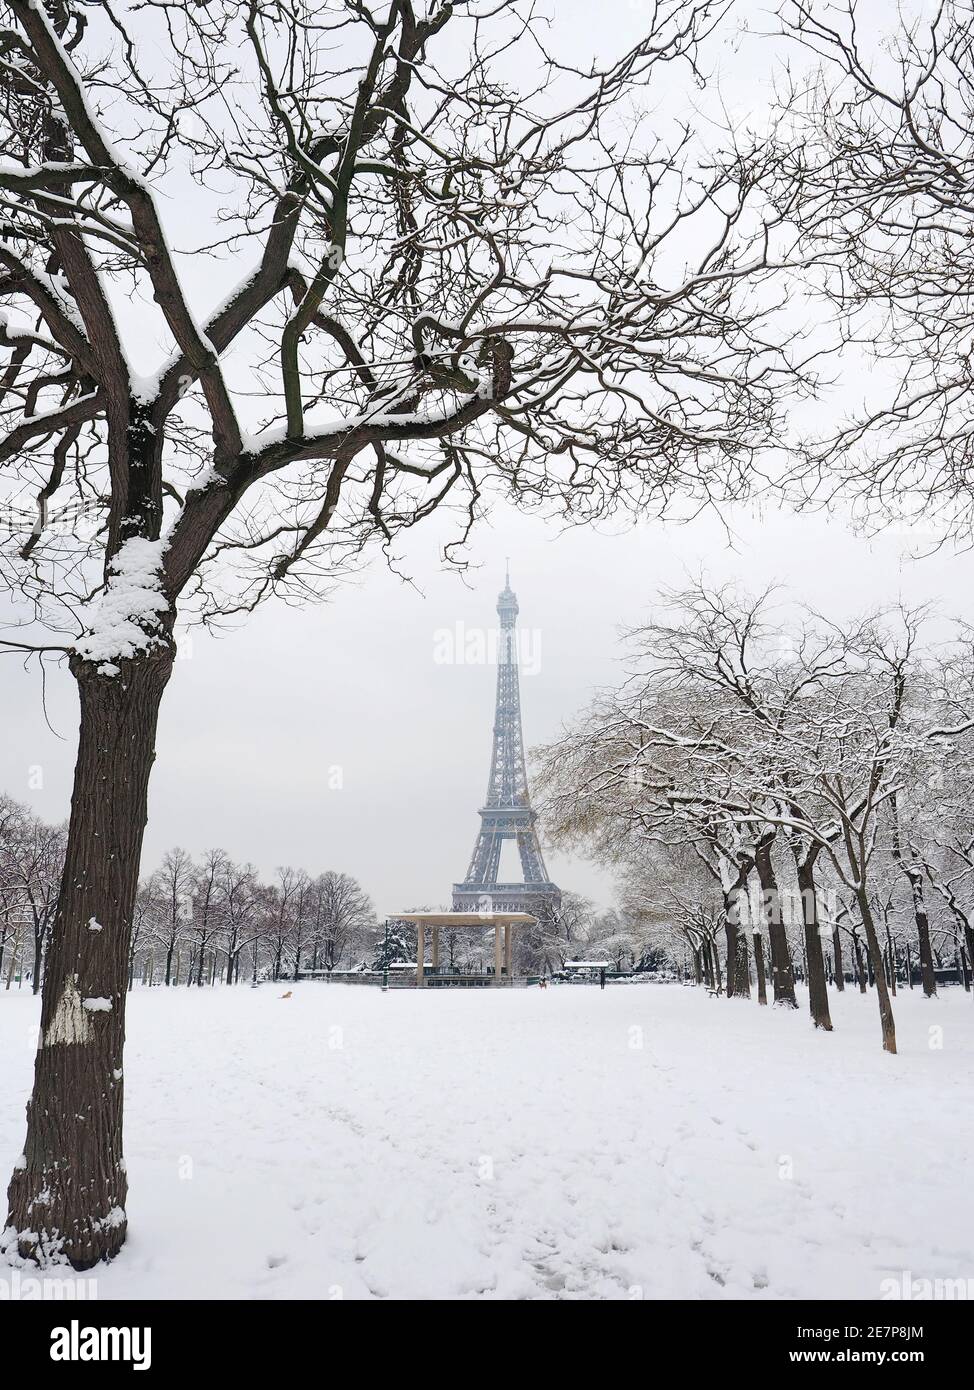 Winter in Paris. Snowy park with Eiffel Tower. Stock Photo